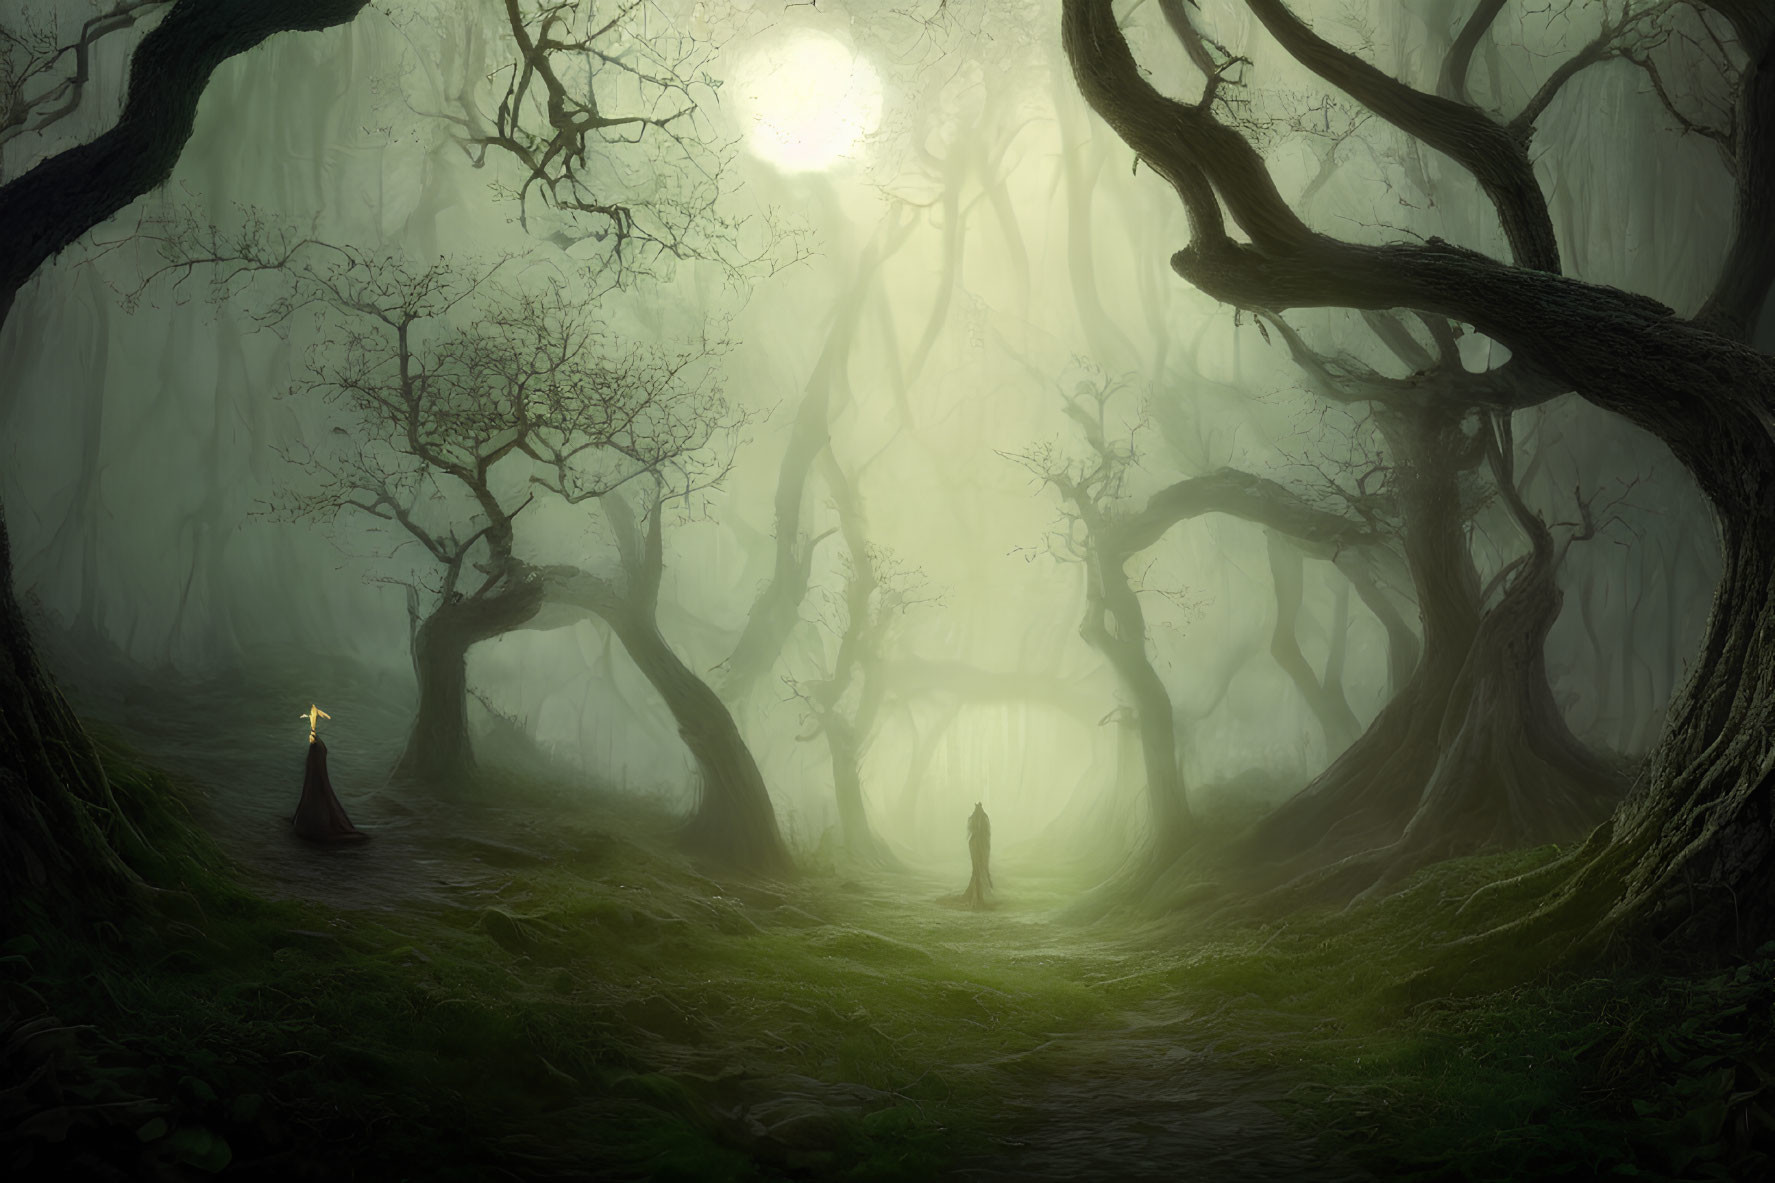 Ethereal forest scene with twisted trees, glowing orb, and cloaked figure